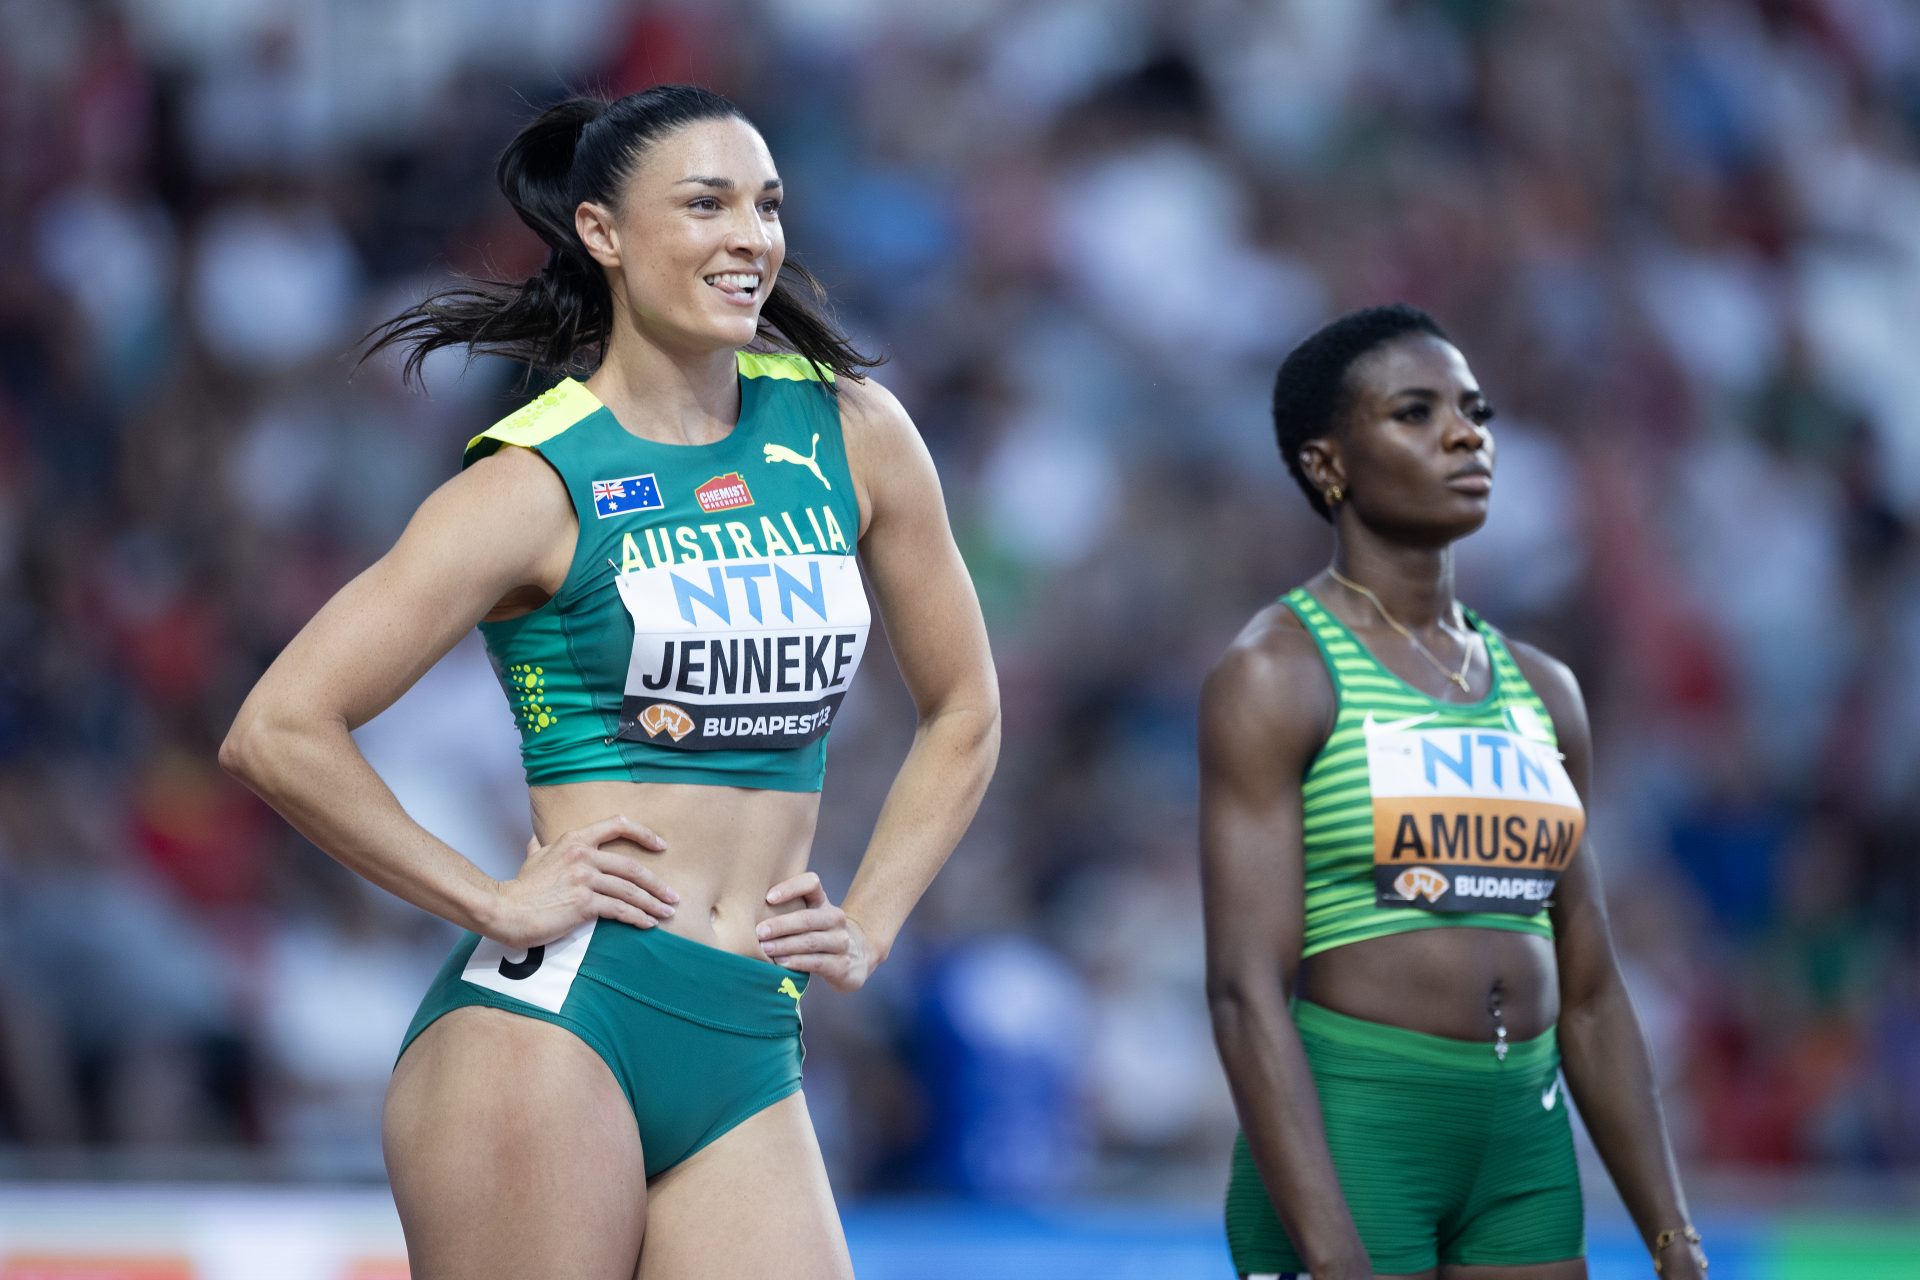 Michelle Jenneke: Viral athlete on path to Olympic redemption